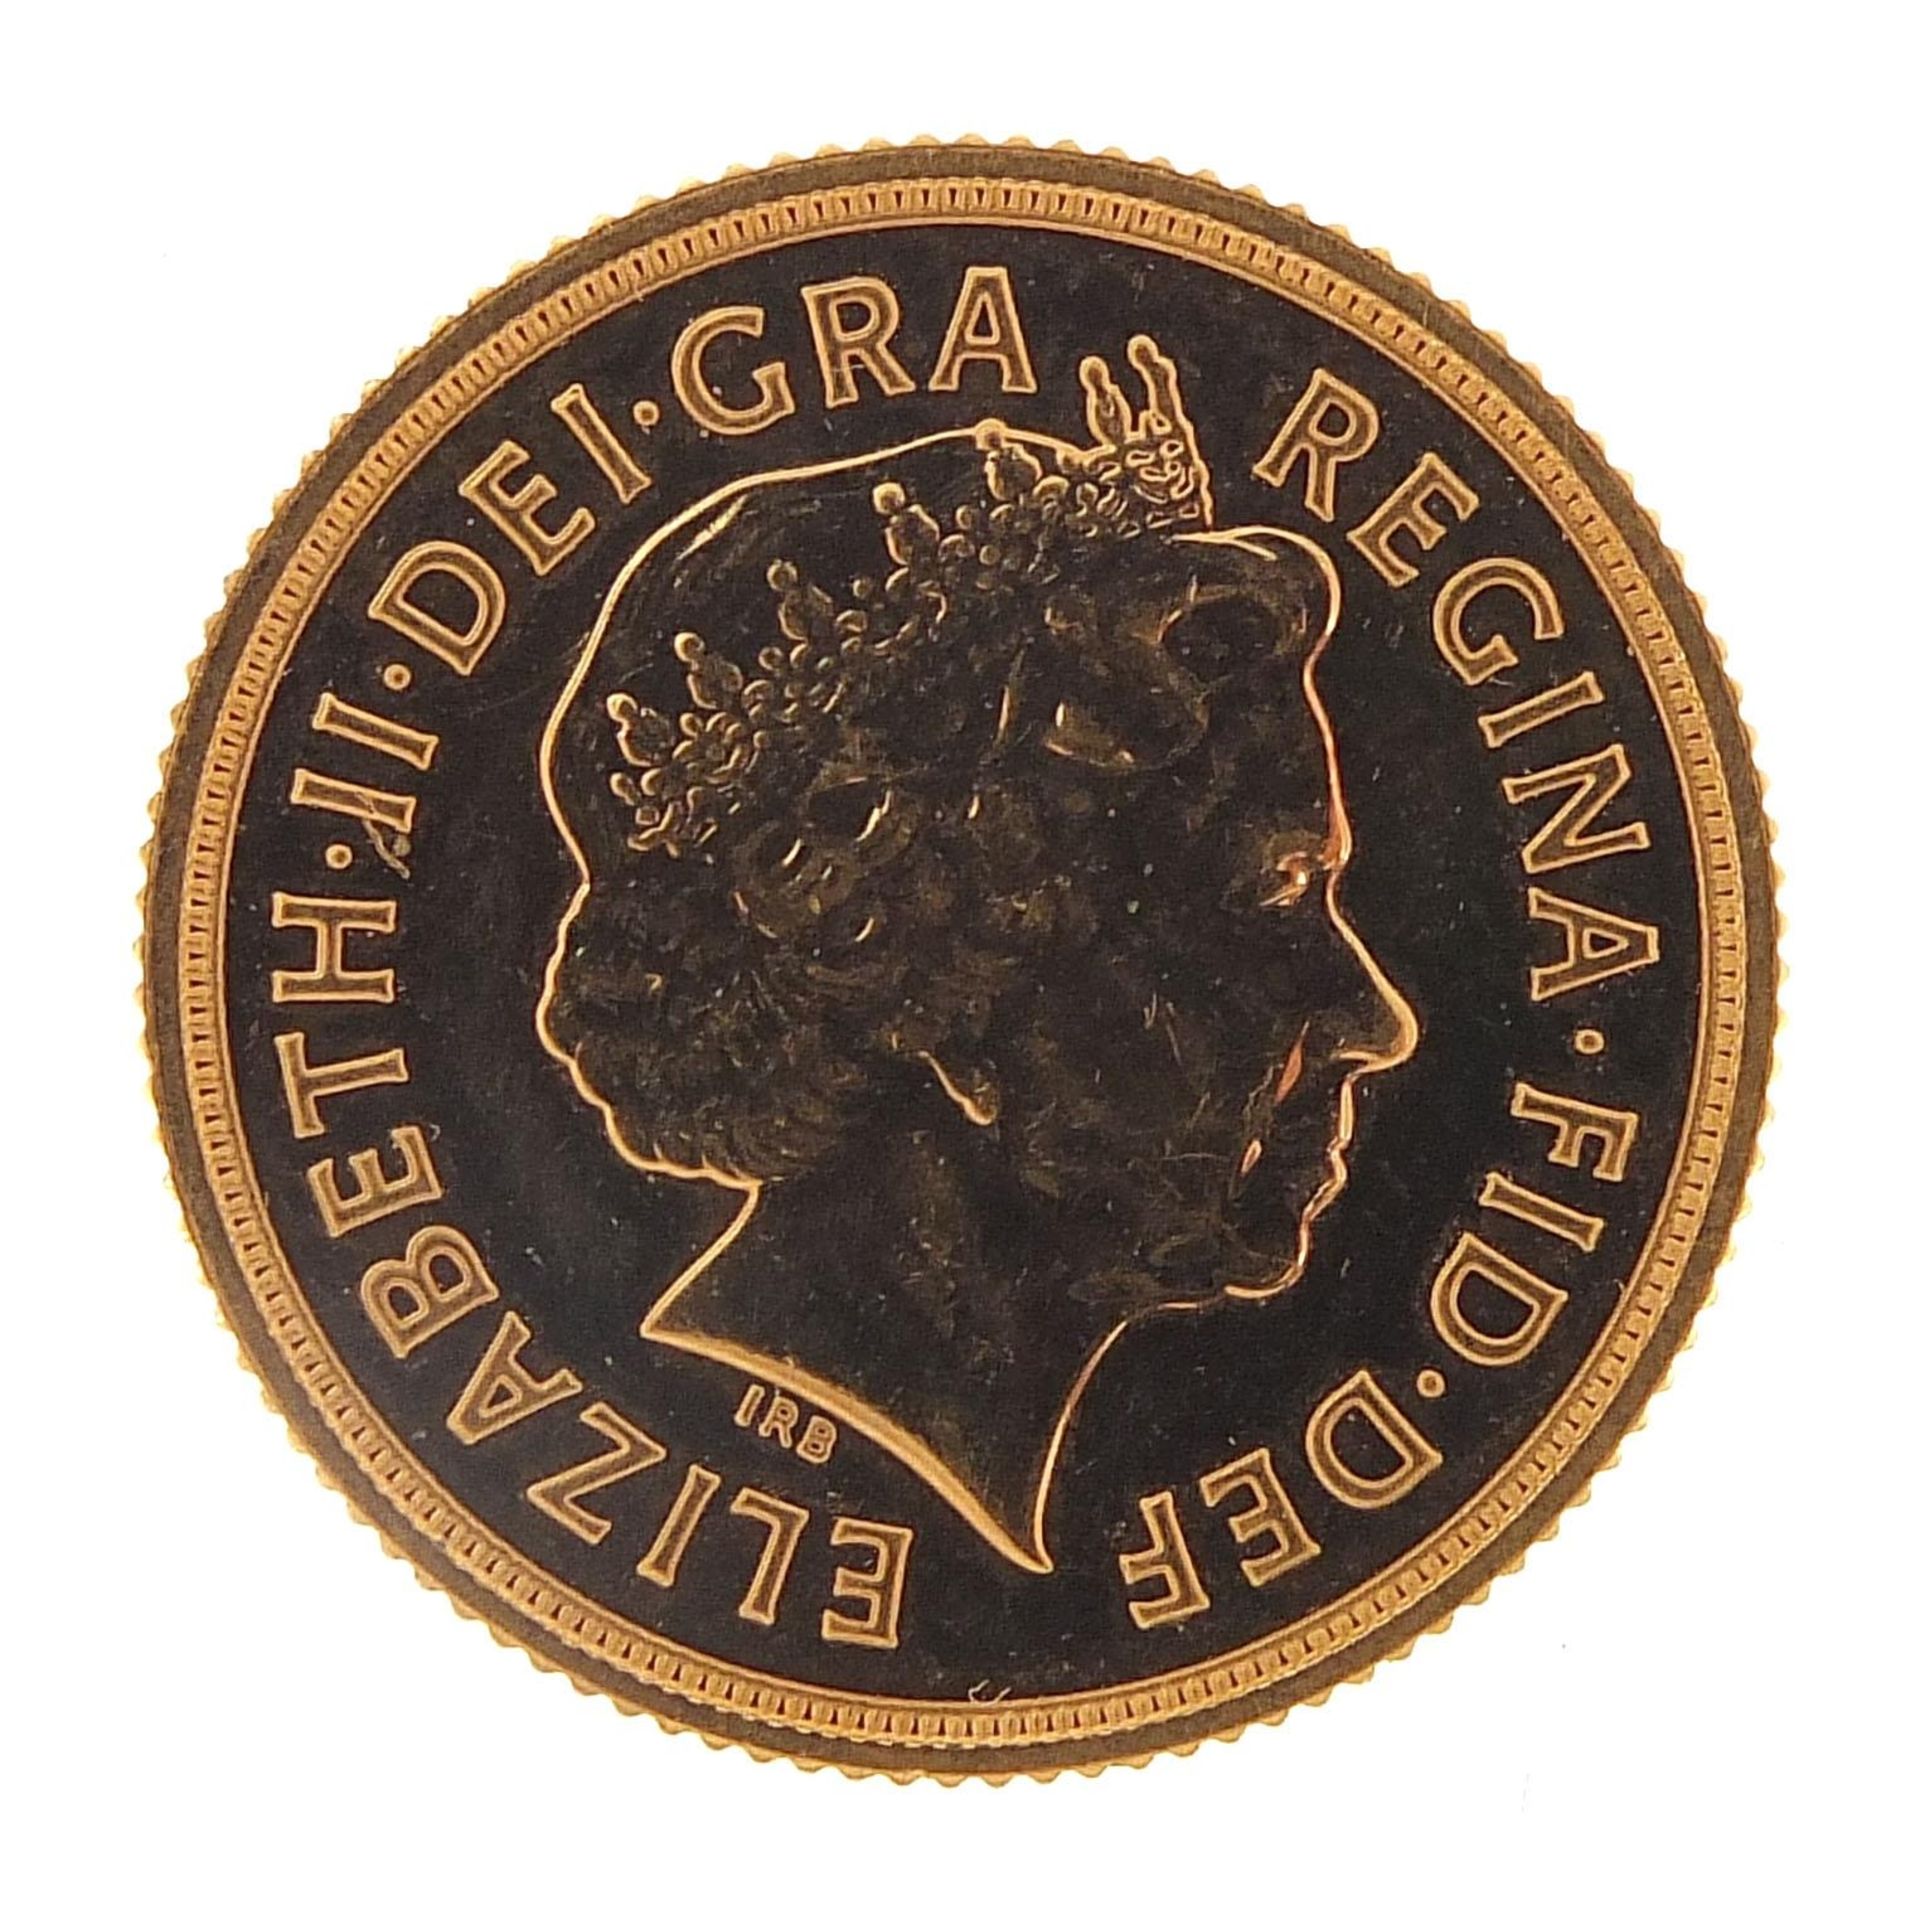 Elizabeth II 2013 gold sovereign - this lot is sold without buyer's premium - Image 2 of 3